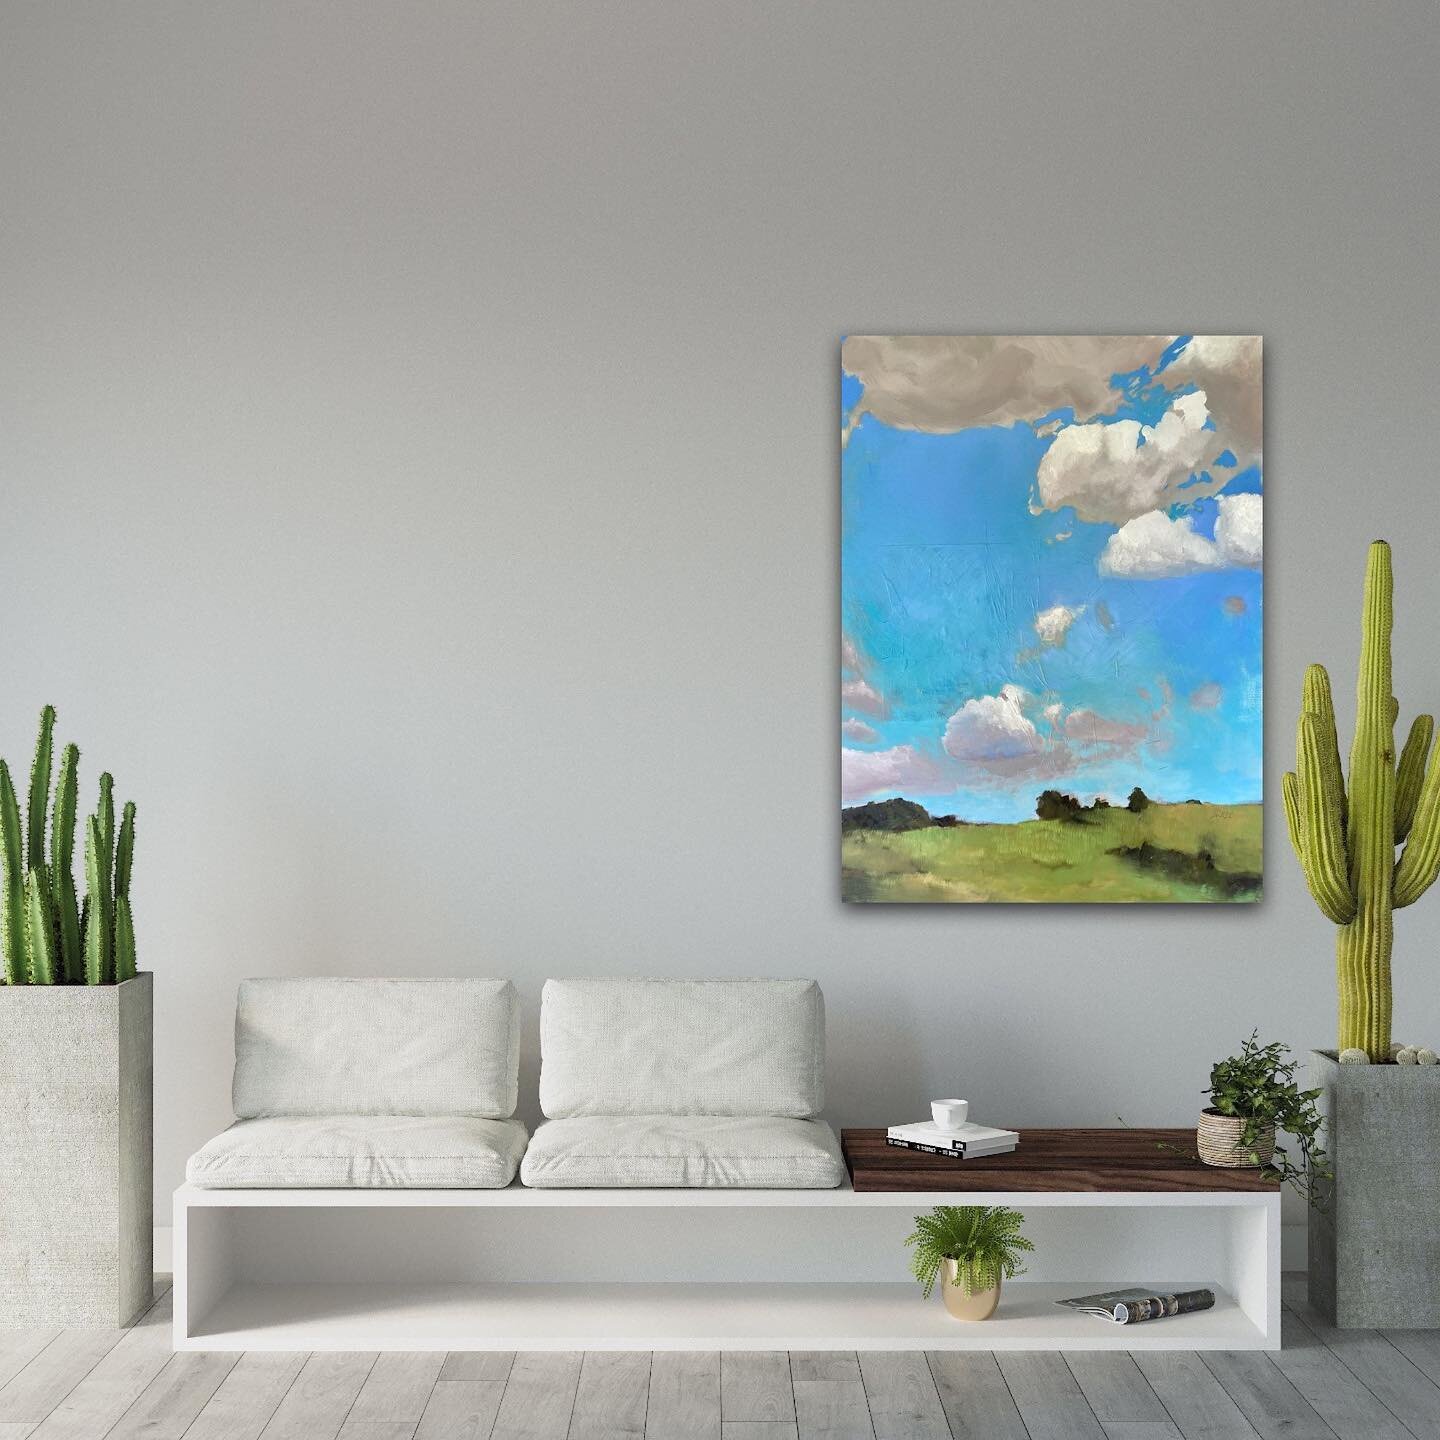 Excited to share this item from my #etsy shop: Clouds and hilltop
oil on canvas with mixed media
recently completed during summer break💙☁️
30x40 https://etsy.me/3Ou89c6